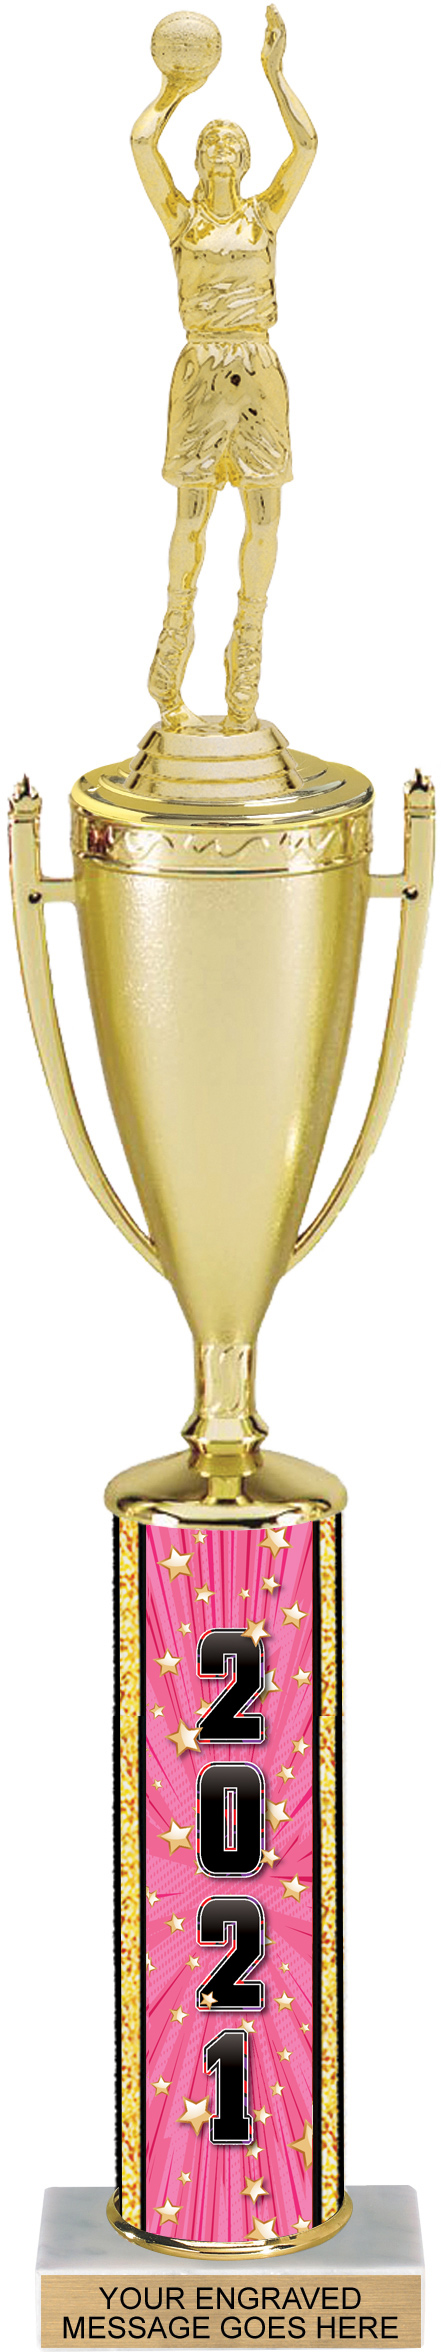 Year Exclusive Comic Stars Column Cup Trophy - 17 inch